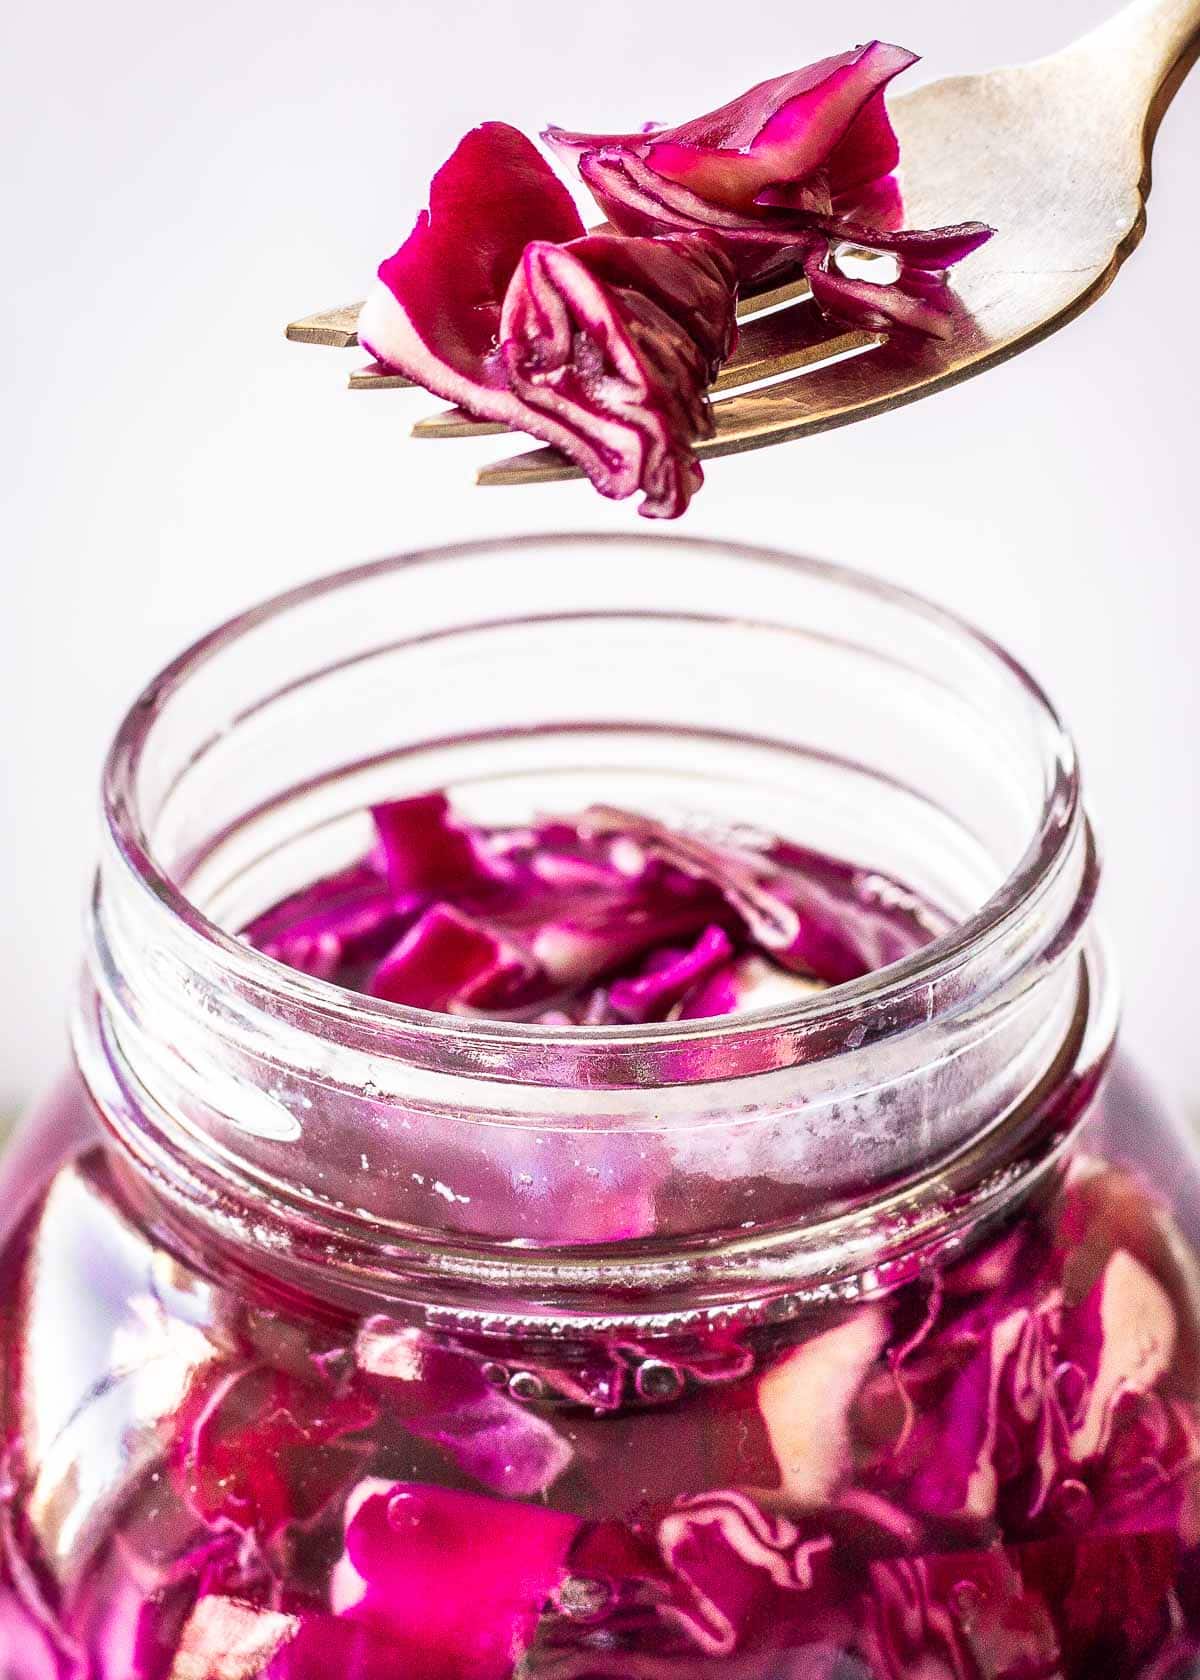 Jar of red cabbage sauerkraut with a fork over it.